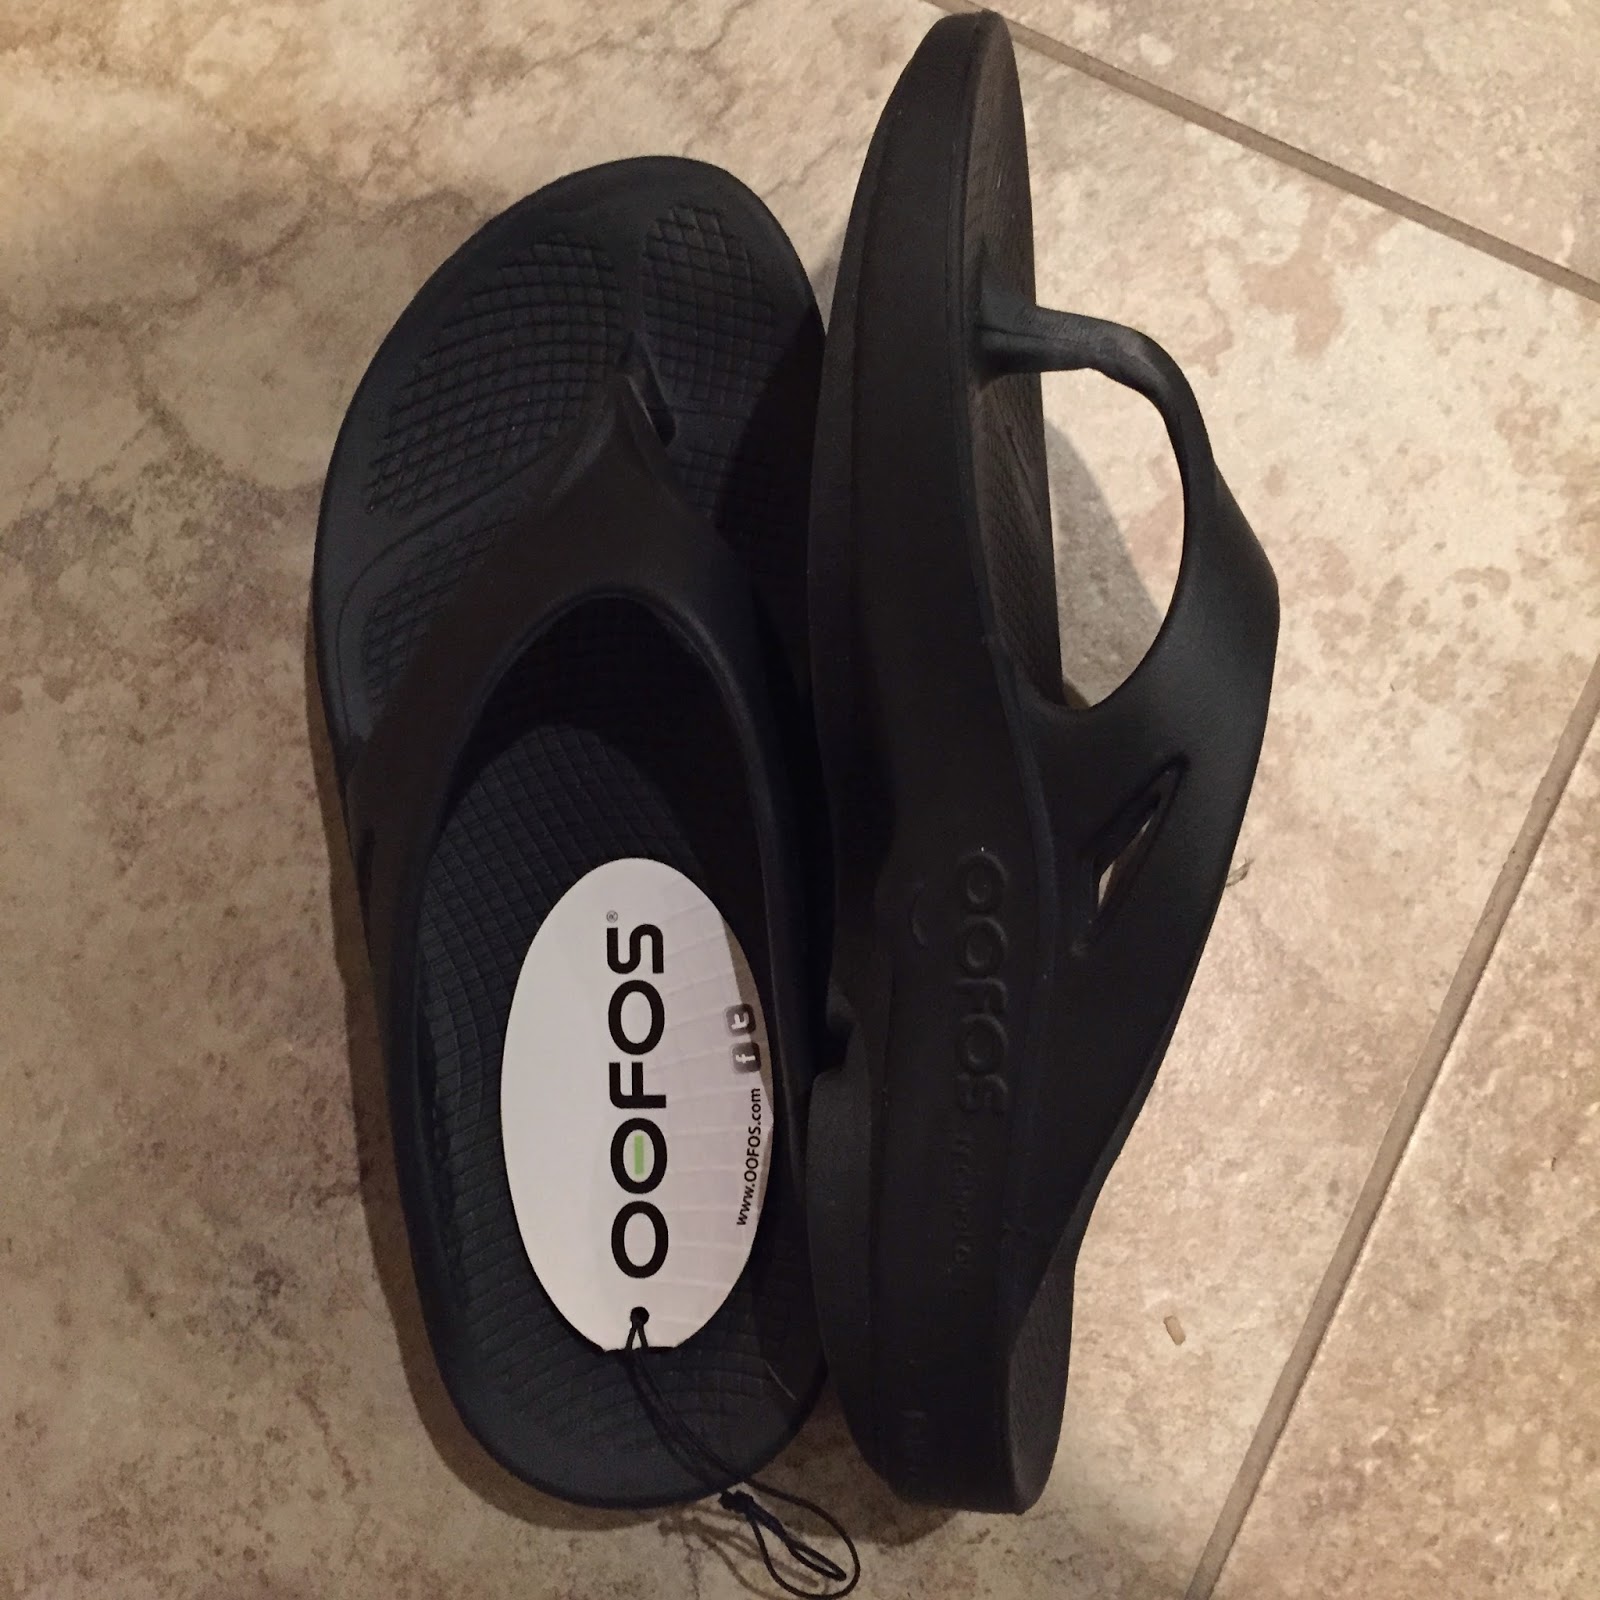 Running with SD Mom: 11 Days of Giving: Day 4 - Oofos #GIVEAWAY